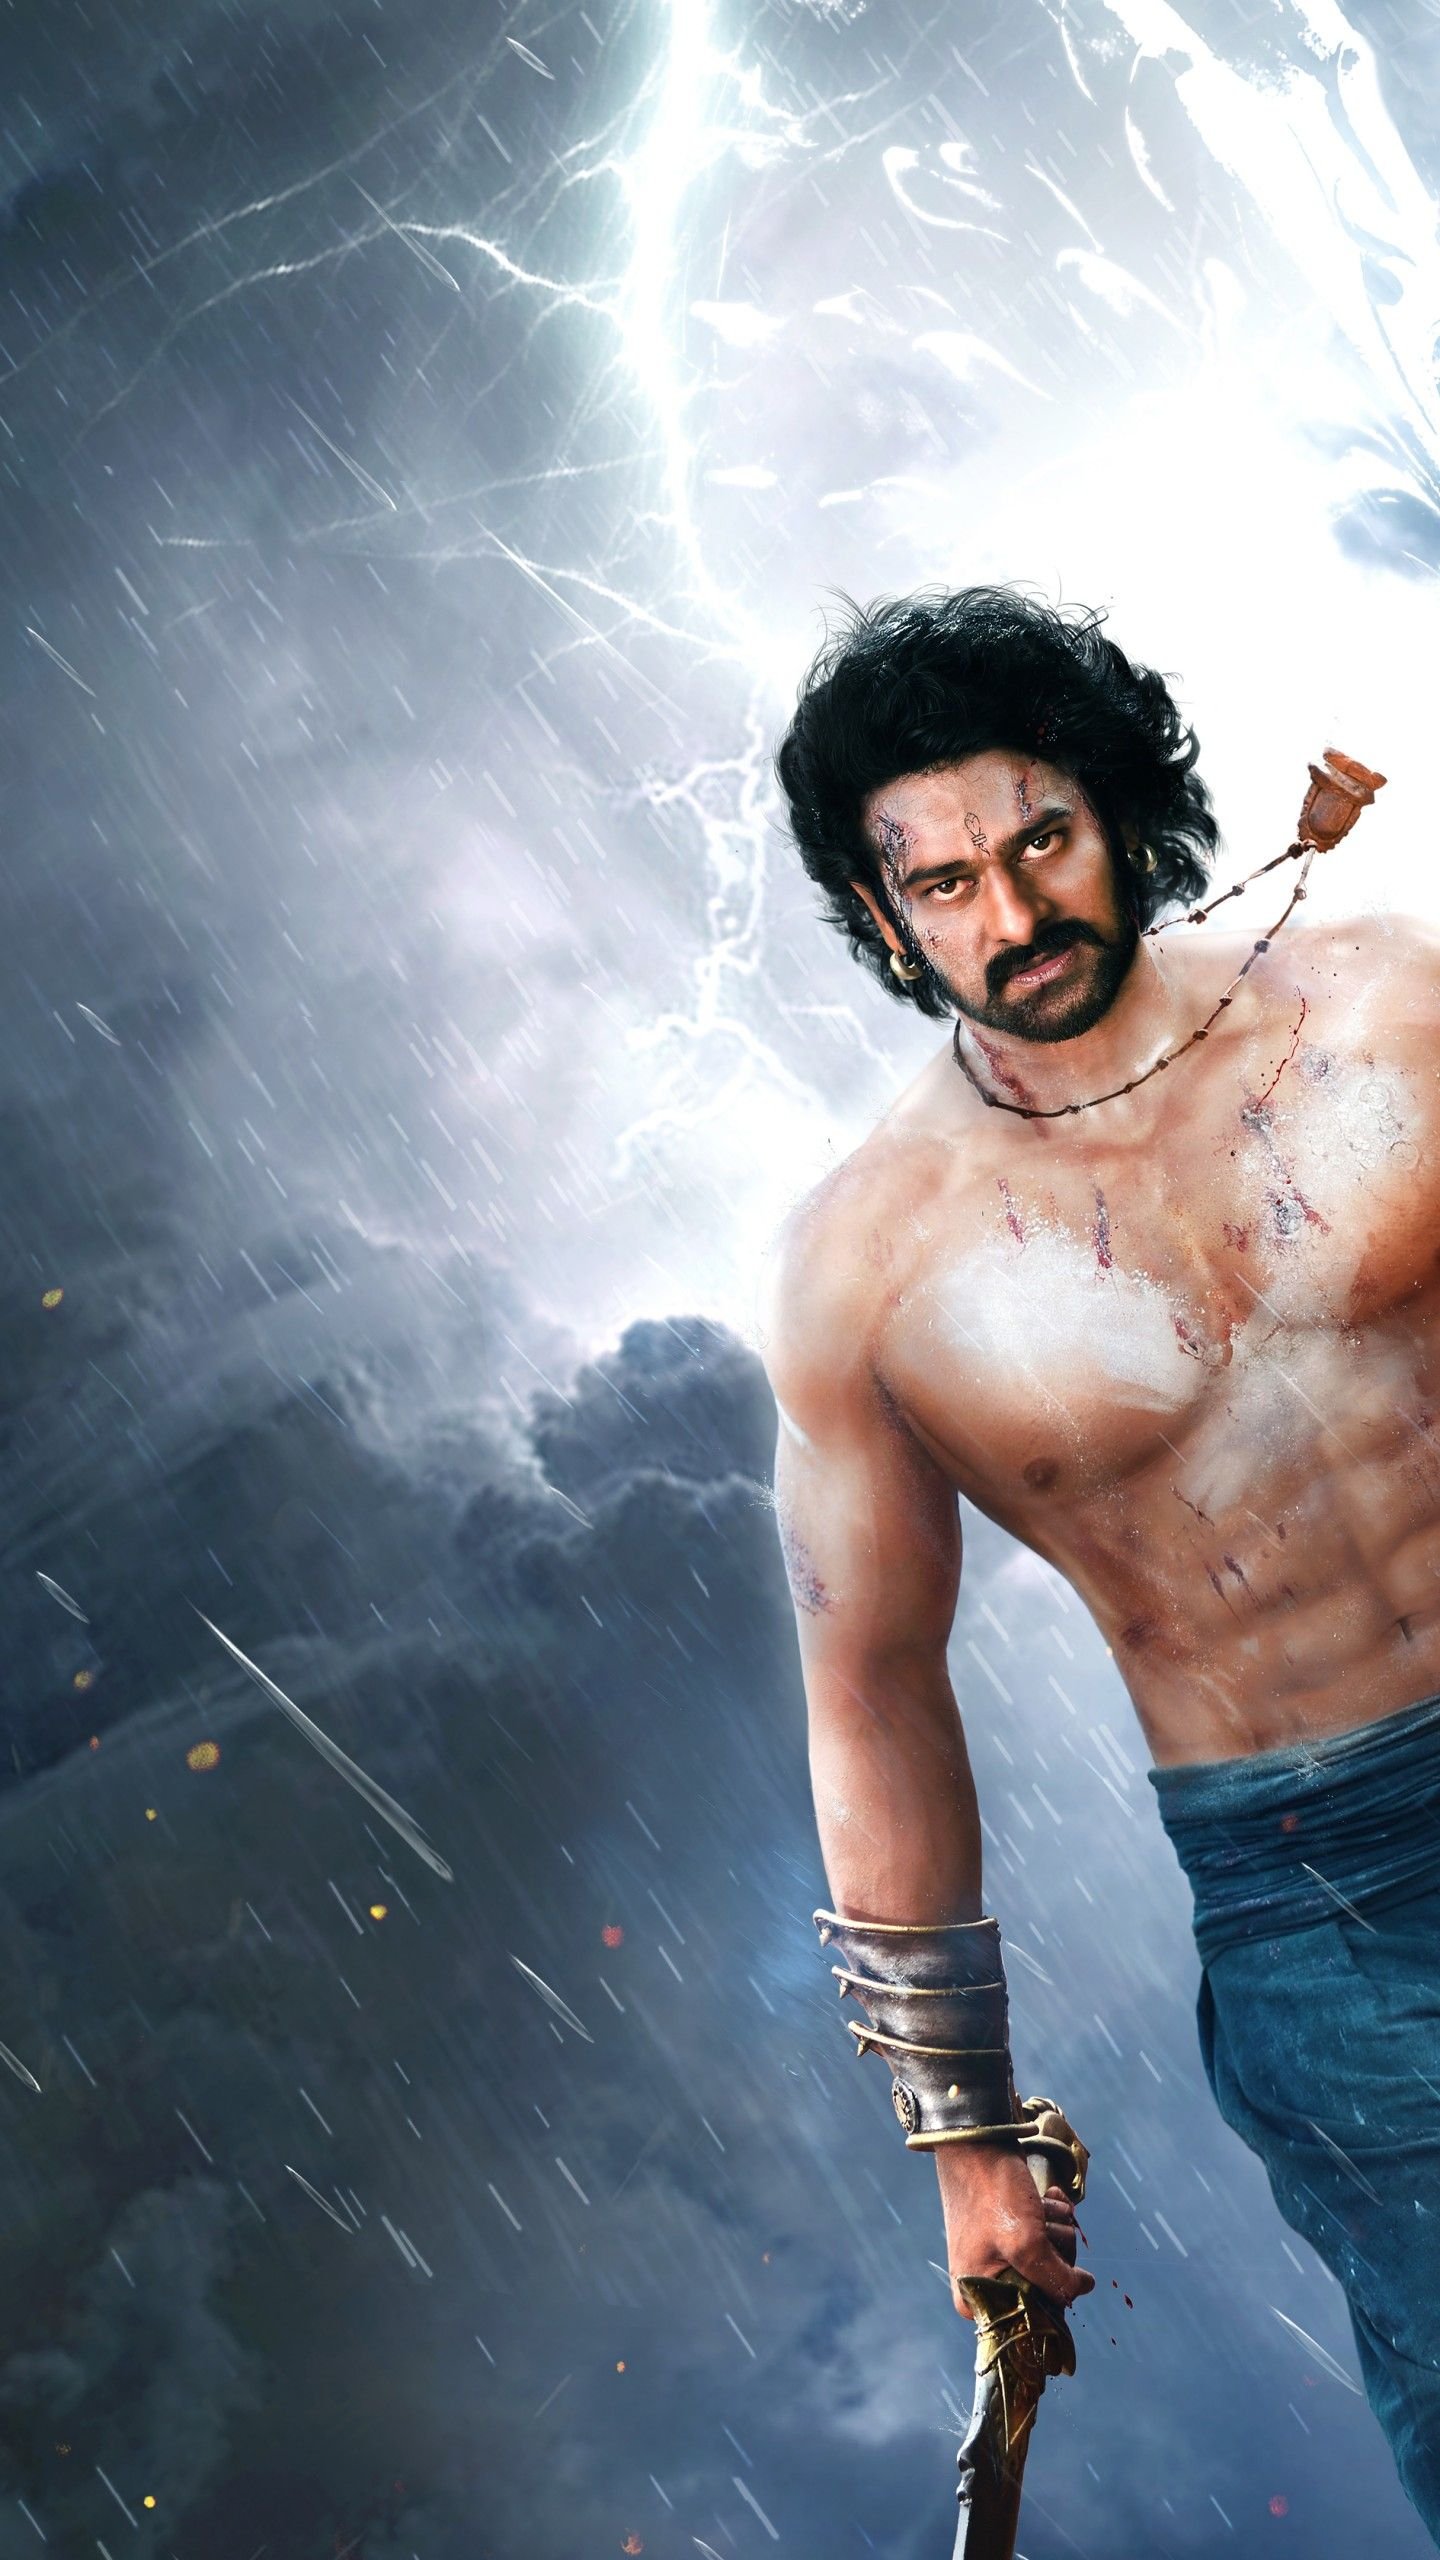 Prabhas Baahubali Movie Wallpapers Ultra HD2 on LARGE PRINT 36X24 INCHES  Photographic Paper - Art & Paintings posters in India - Buy art, film,  design, movie, music, nature and educational paintings/wallpapers at  Flipkart.com